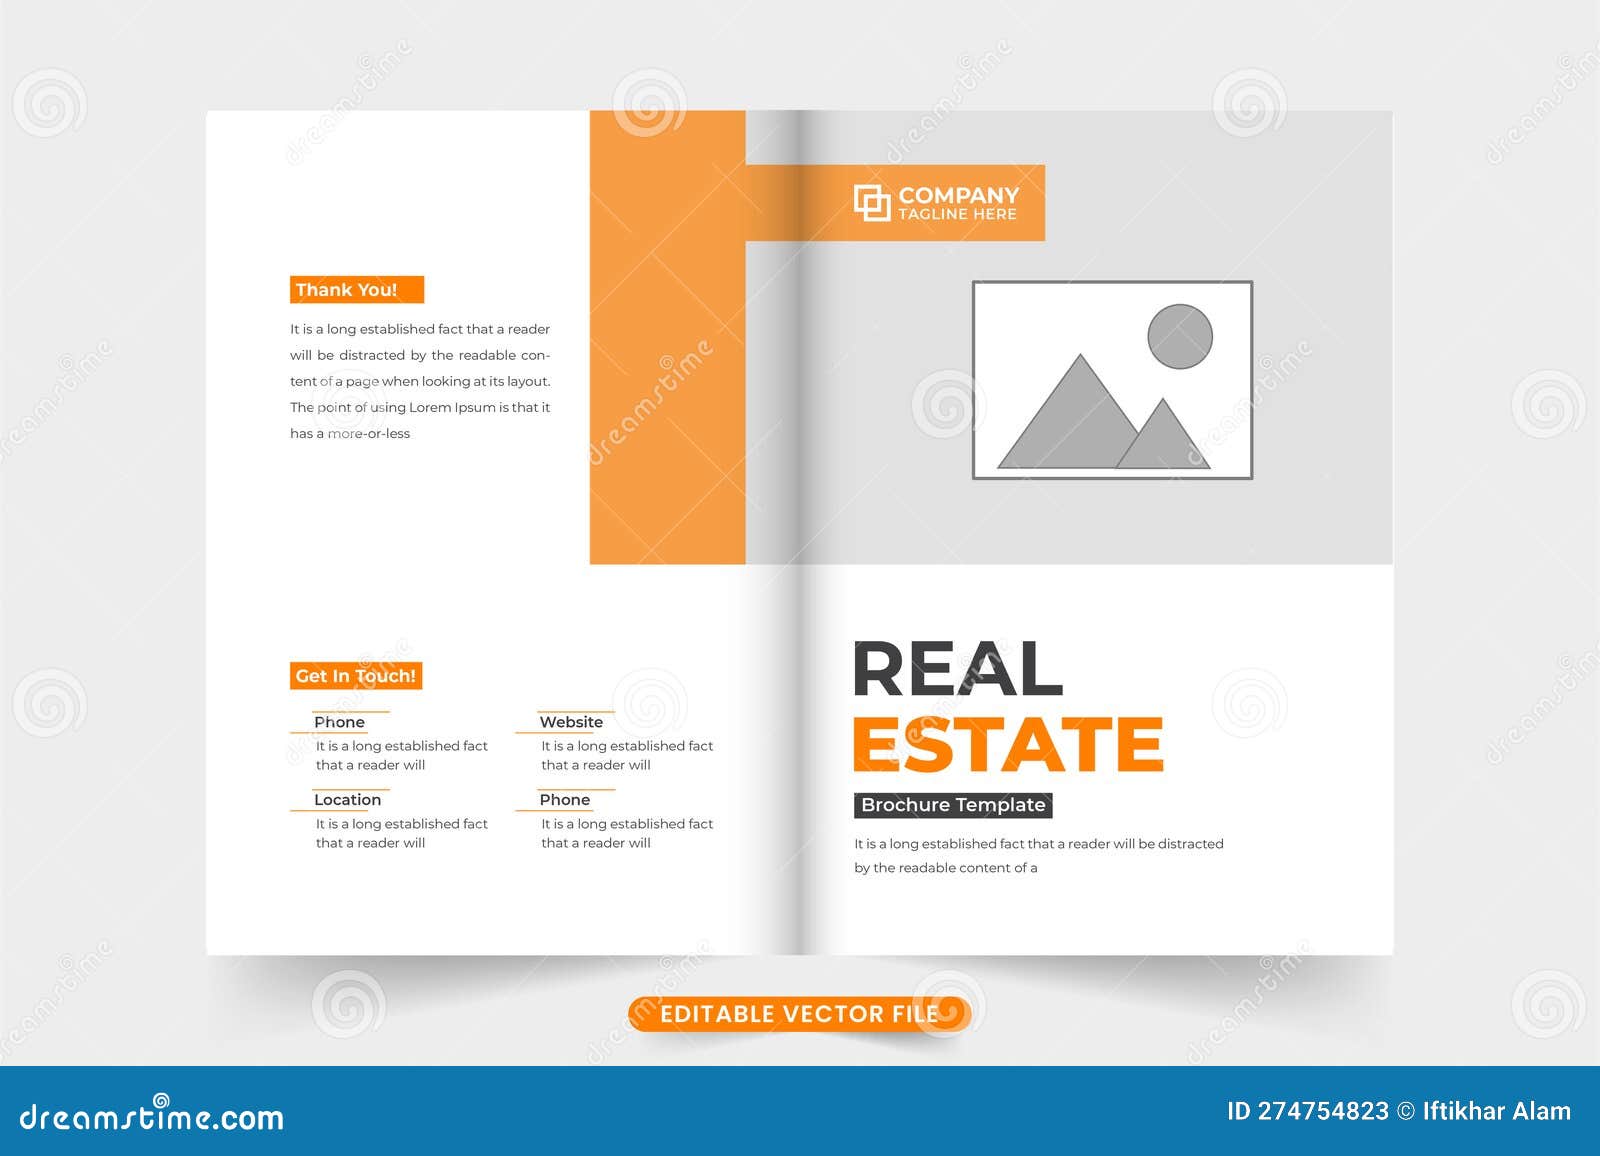 Simple Brochure Cover Decoration for Real Estate Company Marketing ...